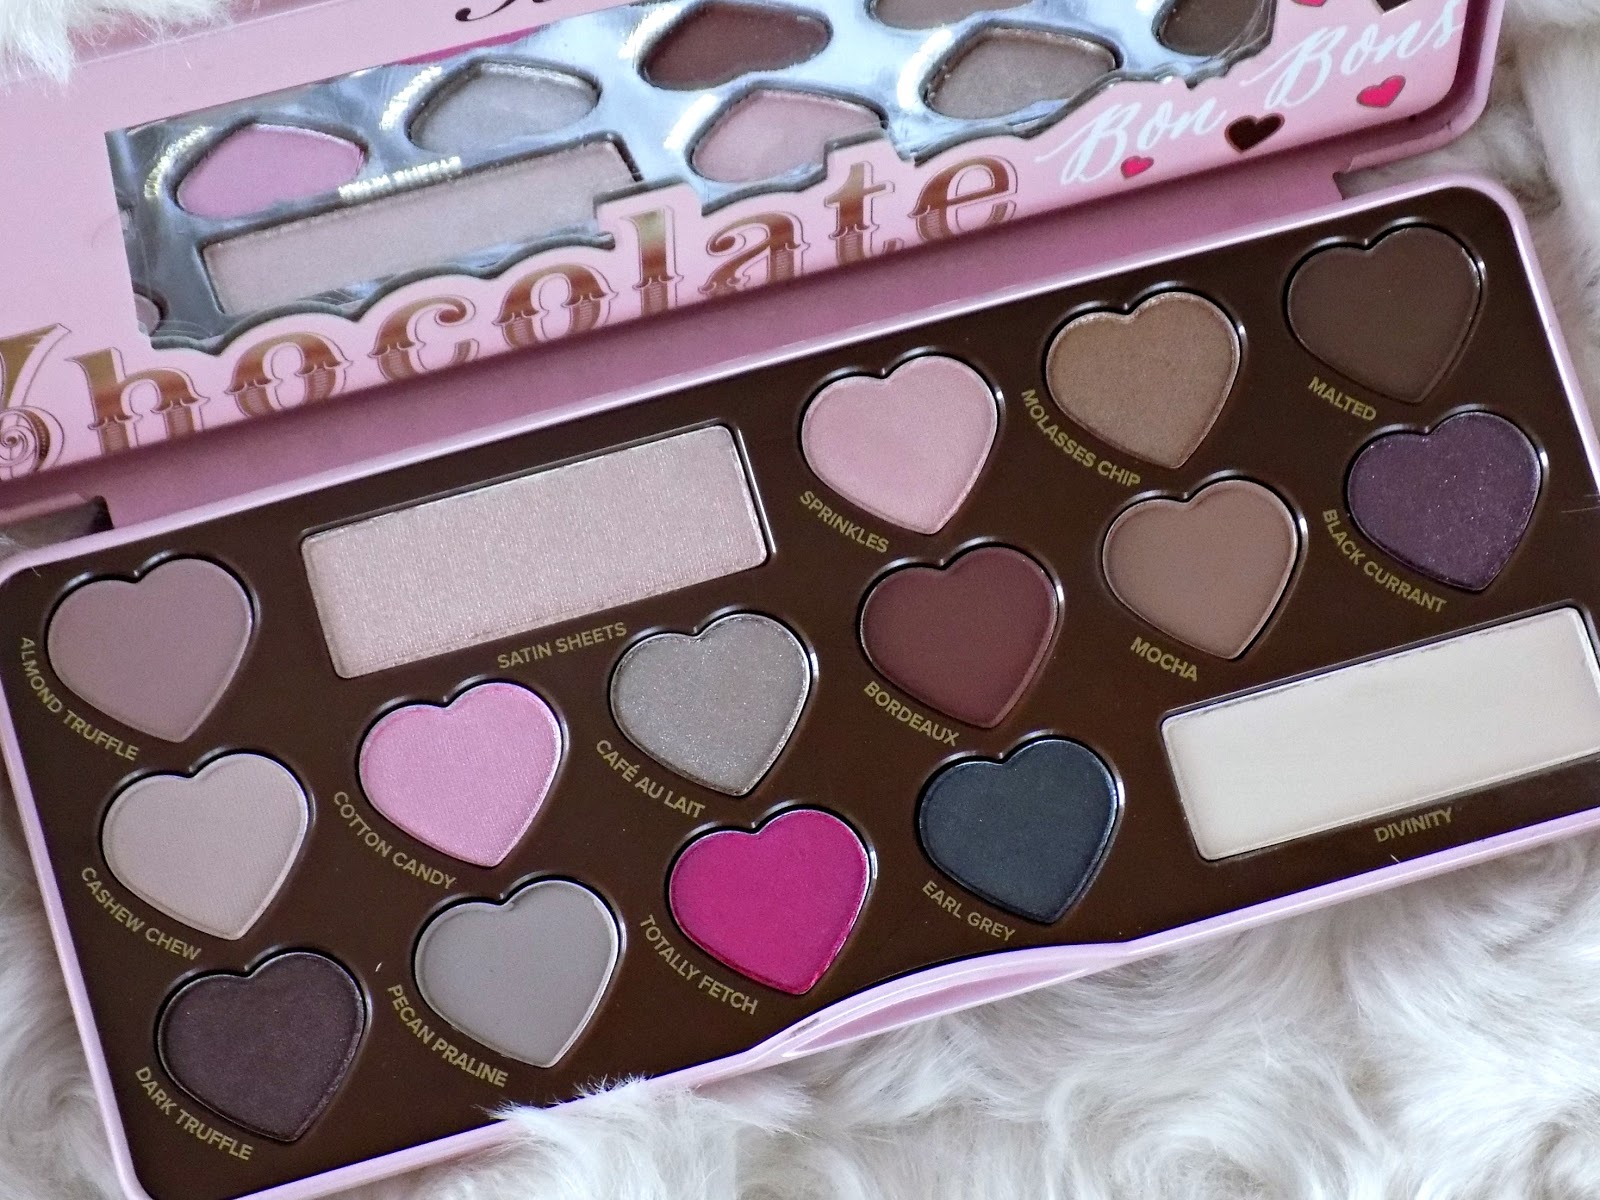 Too Faced Chocolate Bon Bon palette review and swatches